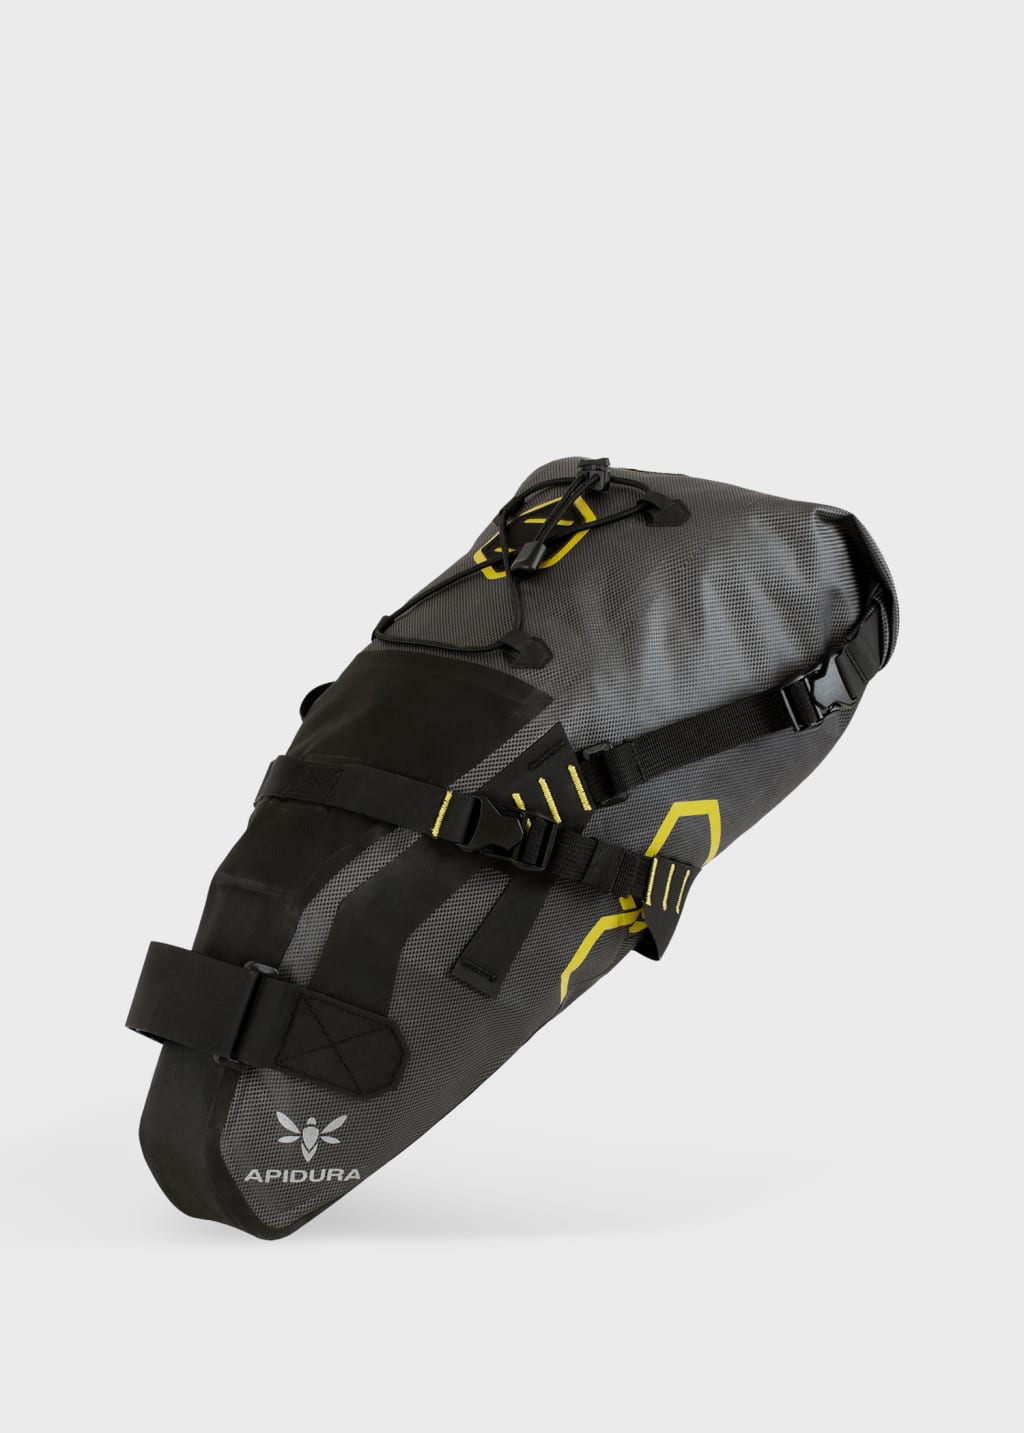 Detail View - 'Expedition' Saddle Pack Cycling Bag by Apidura Paul Smith